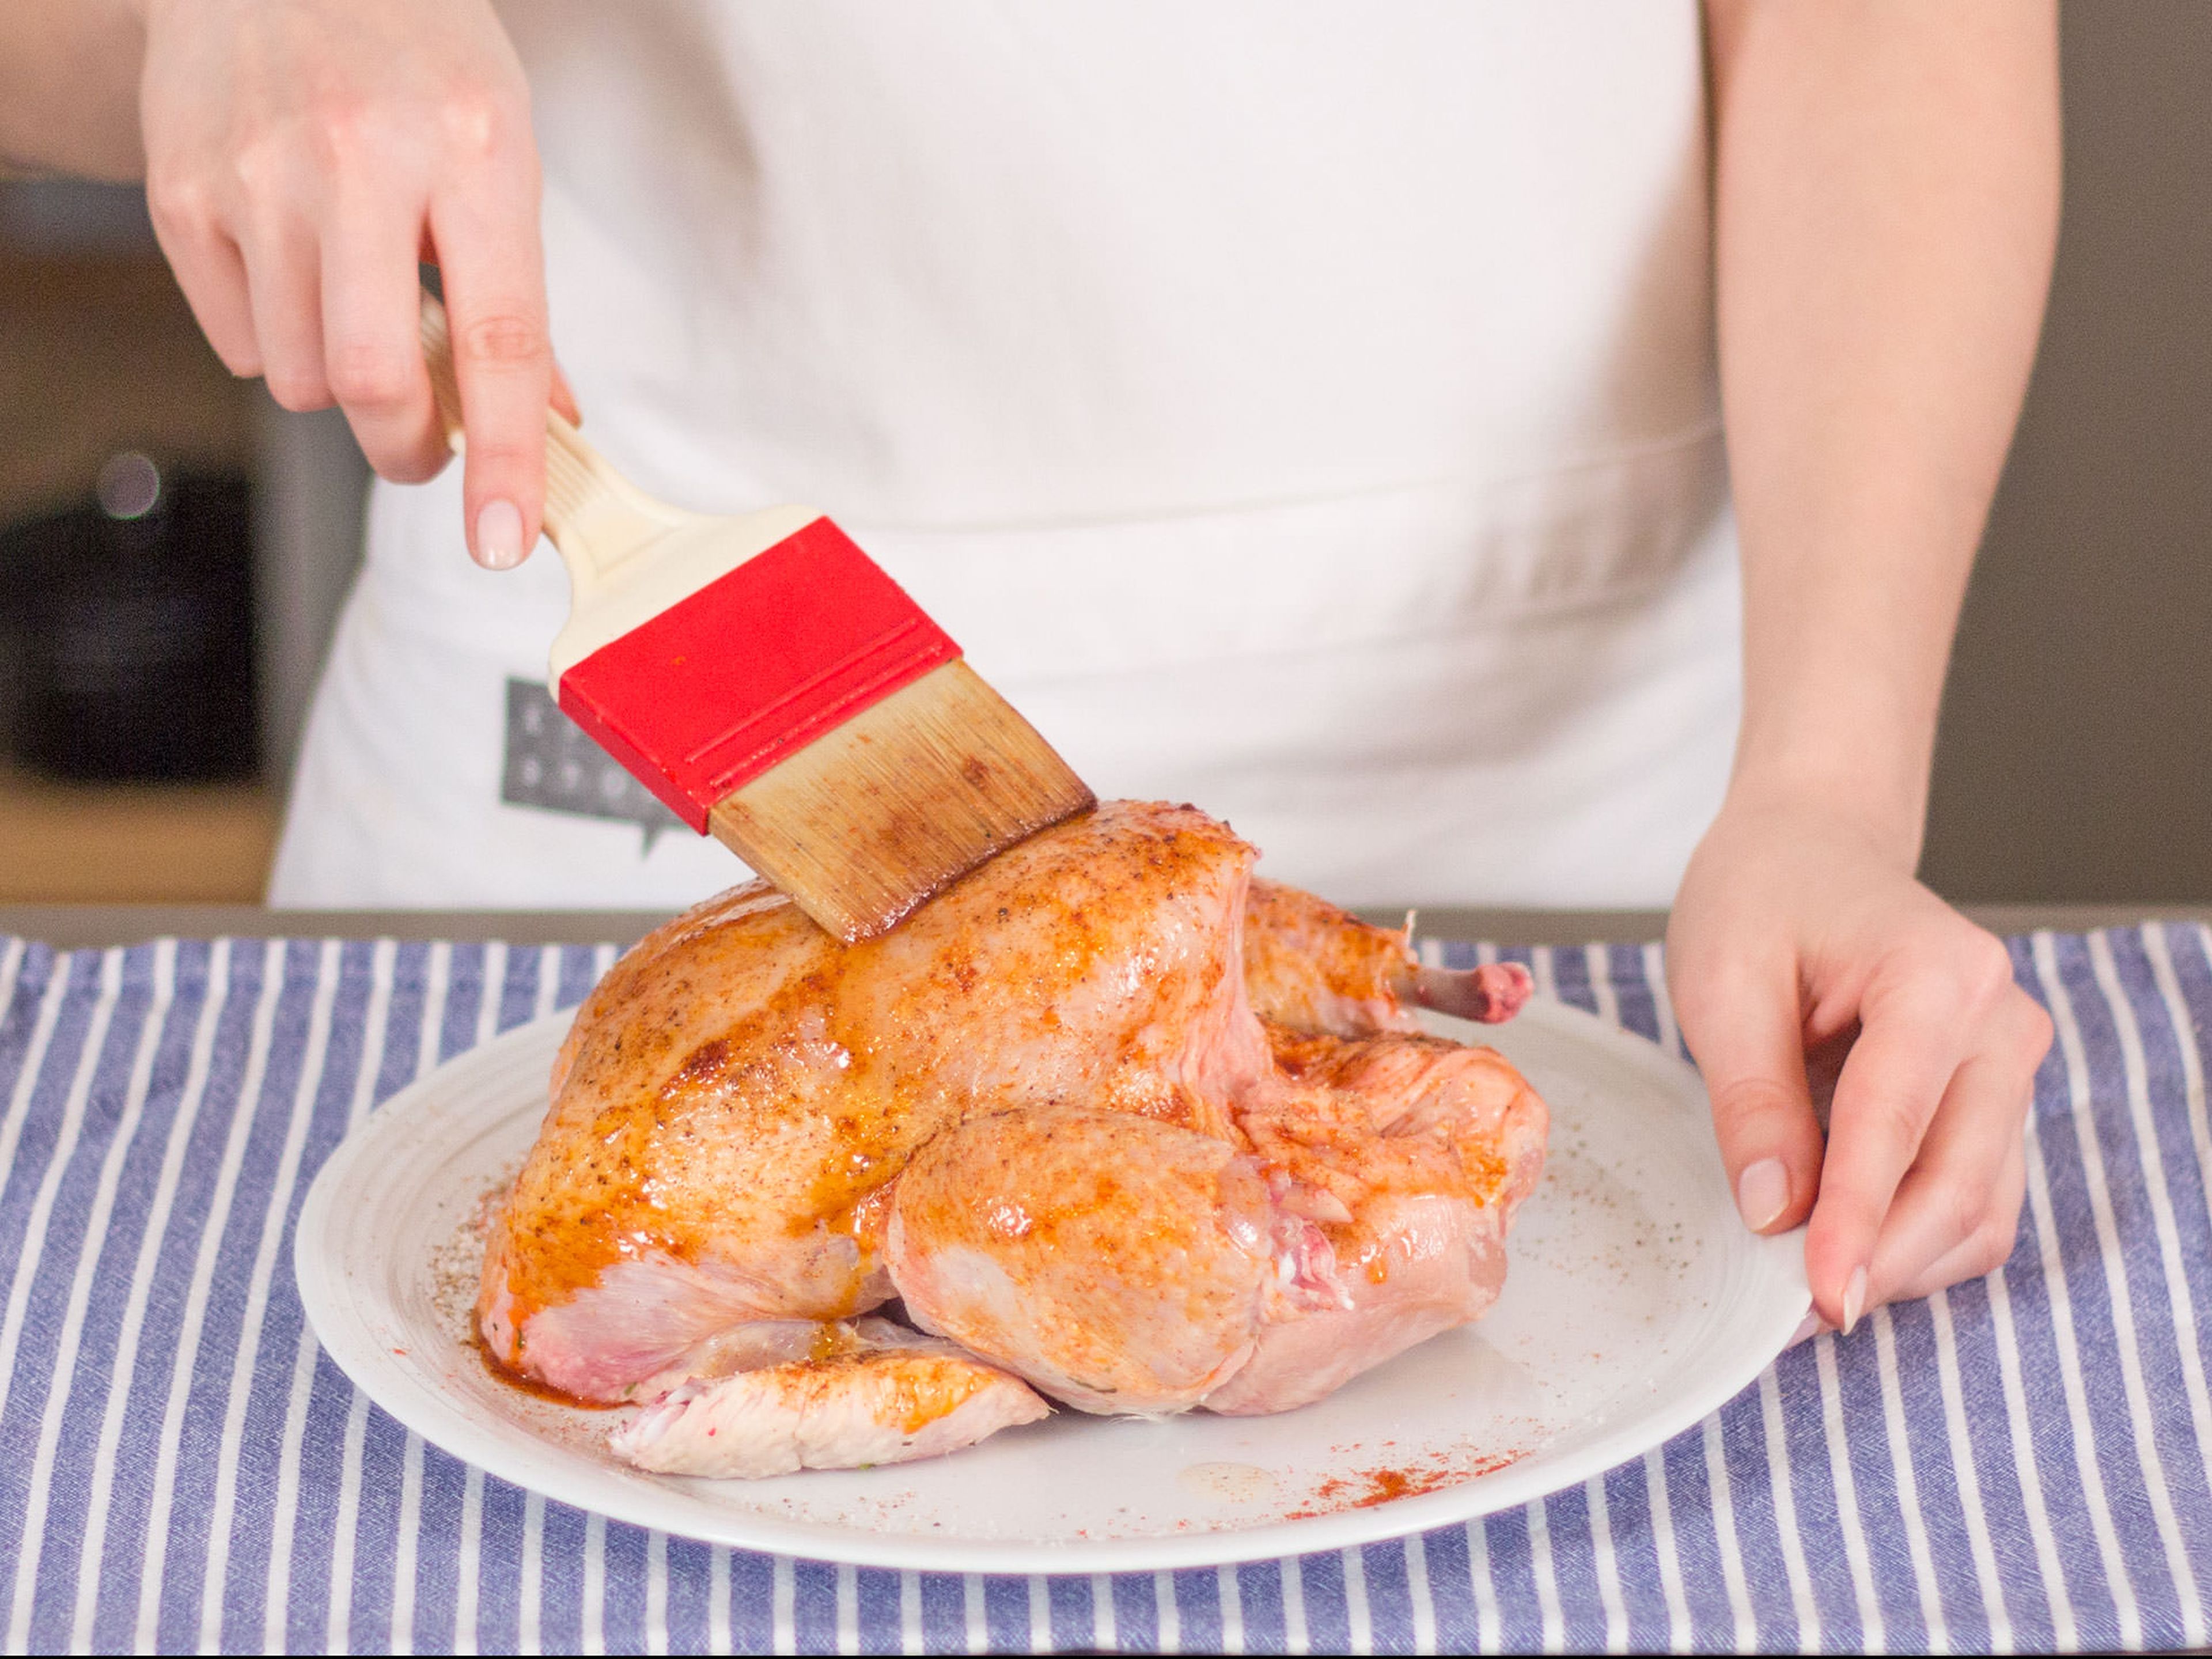 Remove neck and giblets from inner cavity of chicken. Brush with vegetable oil and season with salt, pepper, and paprika.